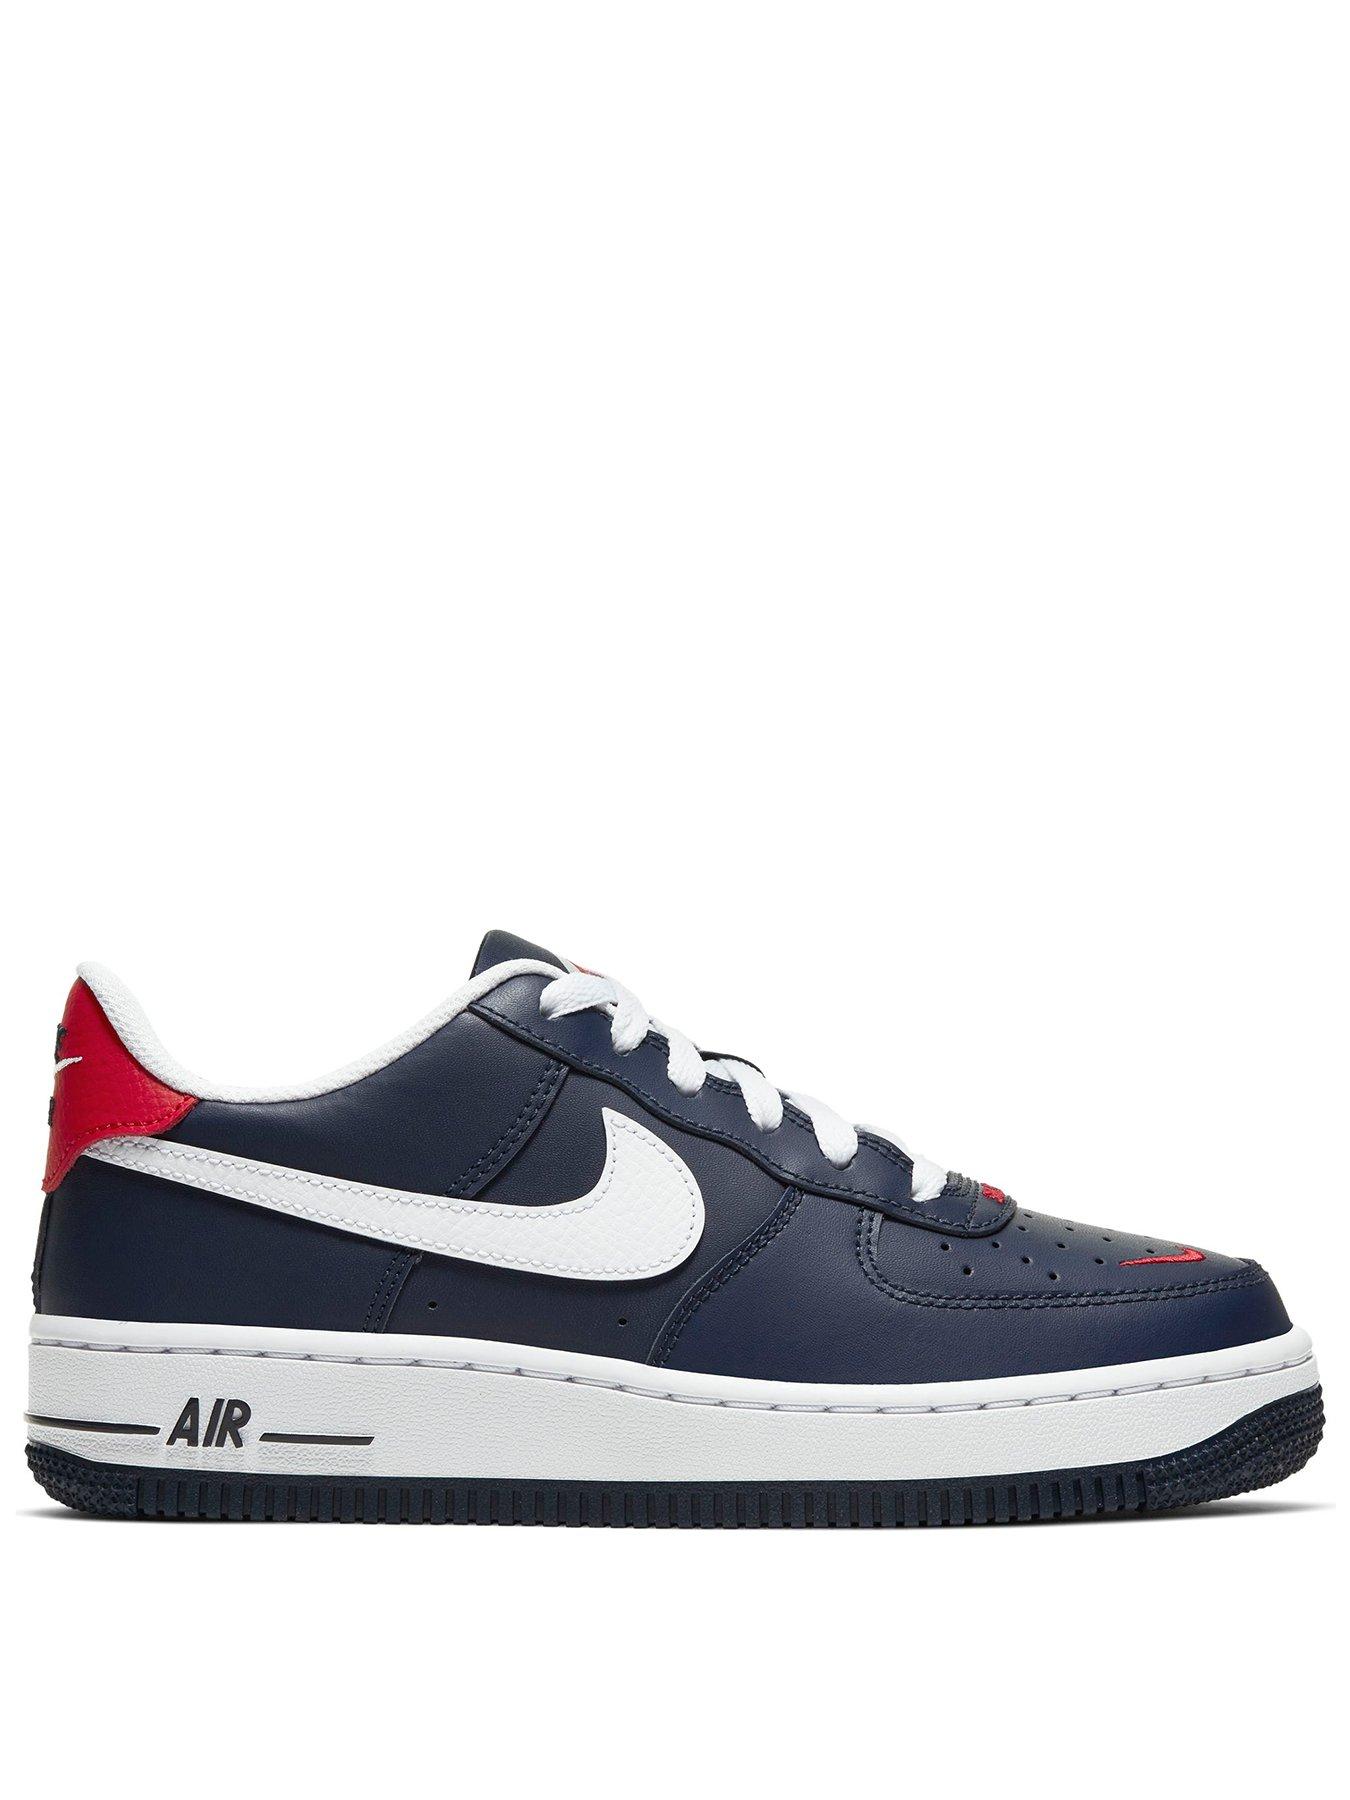 nike air force 1 junior size 3